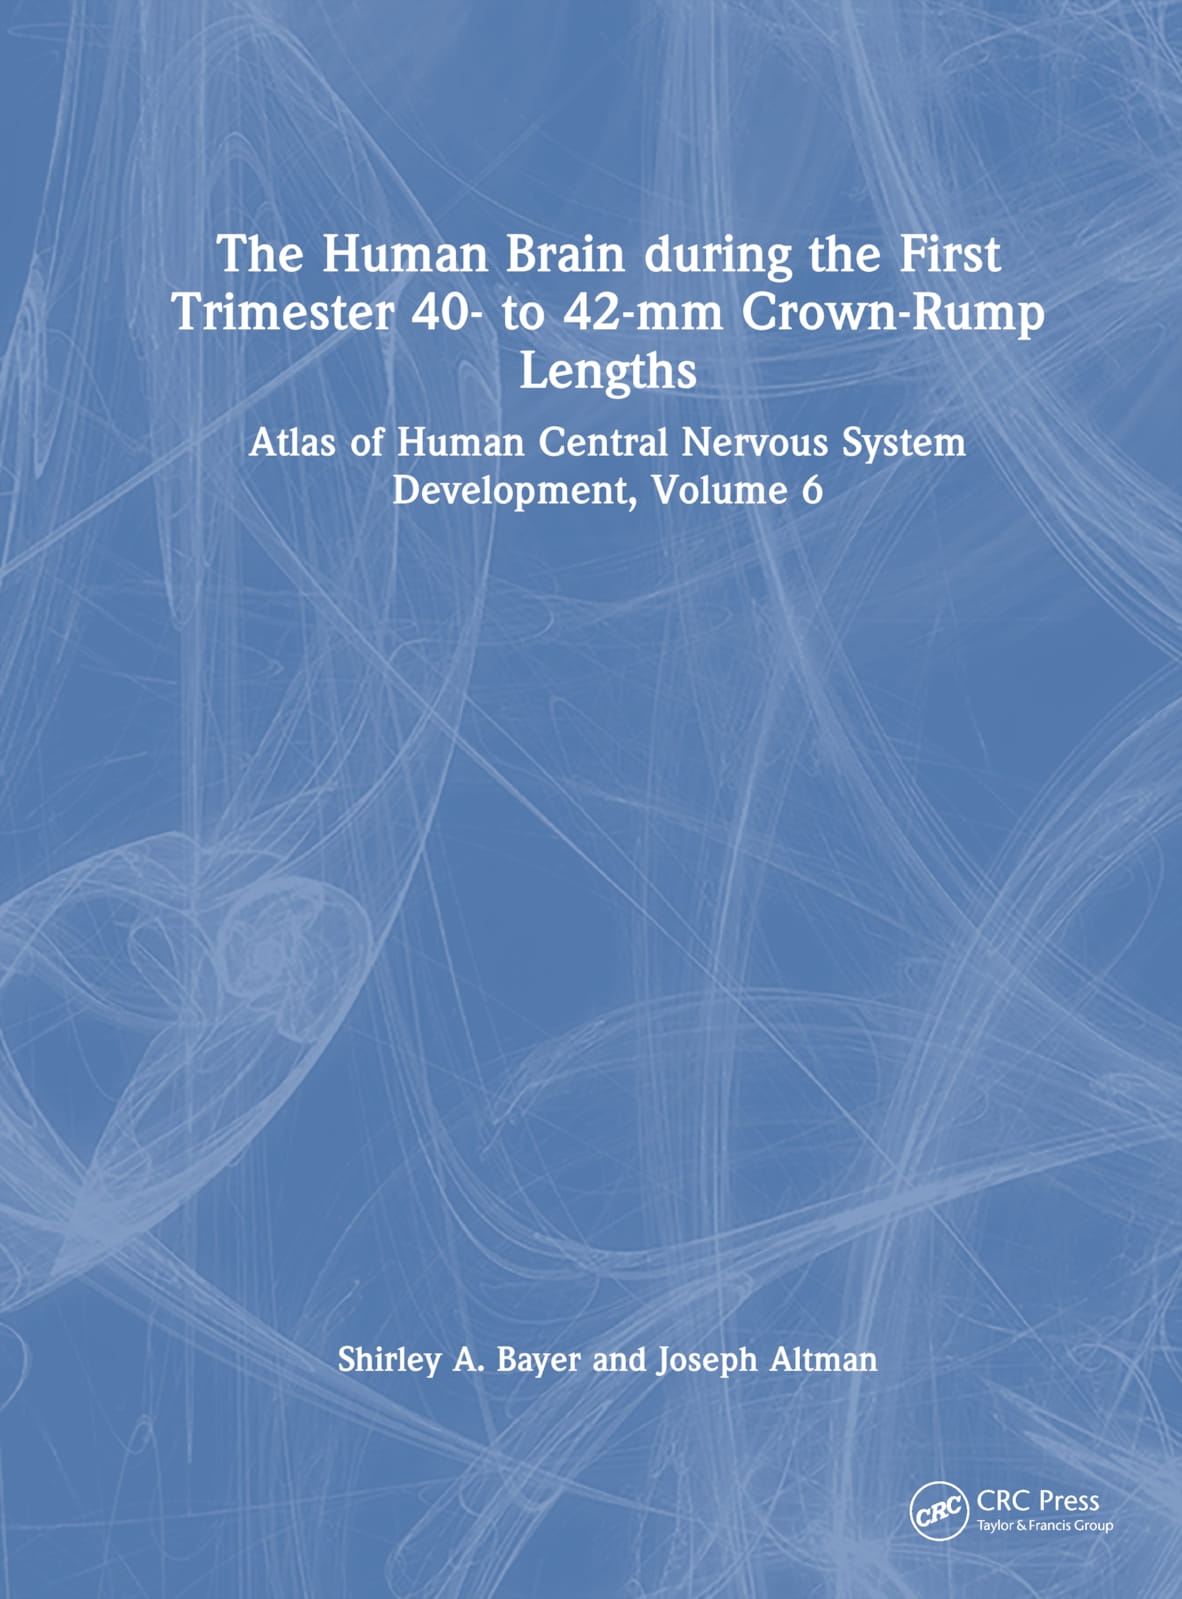 The Human Brain During the First Trimester 40- To 42-MM Crown-Rump Lengths: Atlas of Human Central Nervous System Development, Volume 6